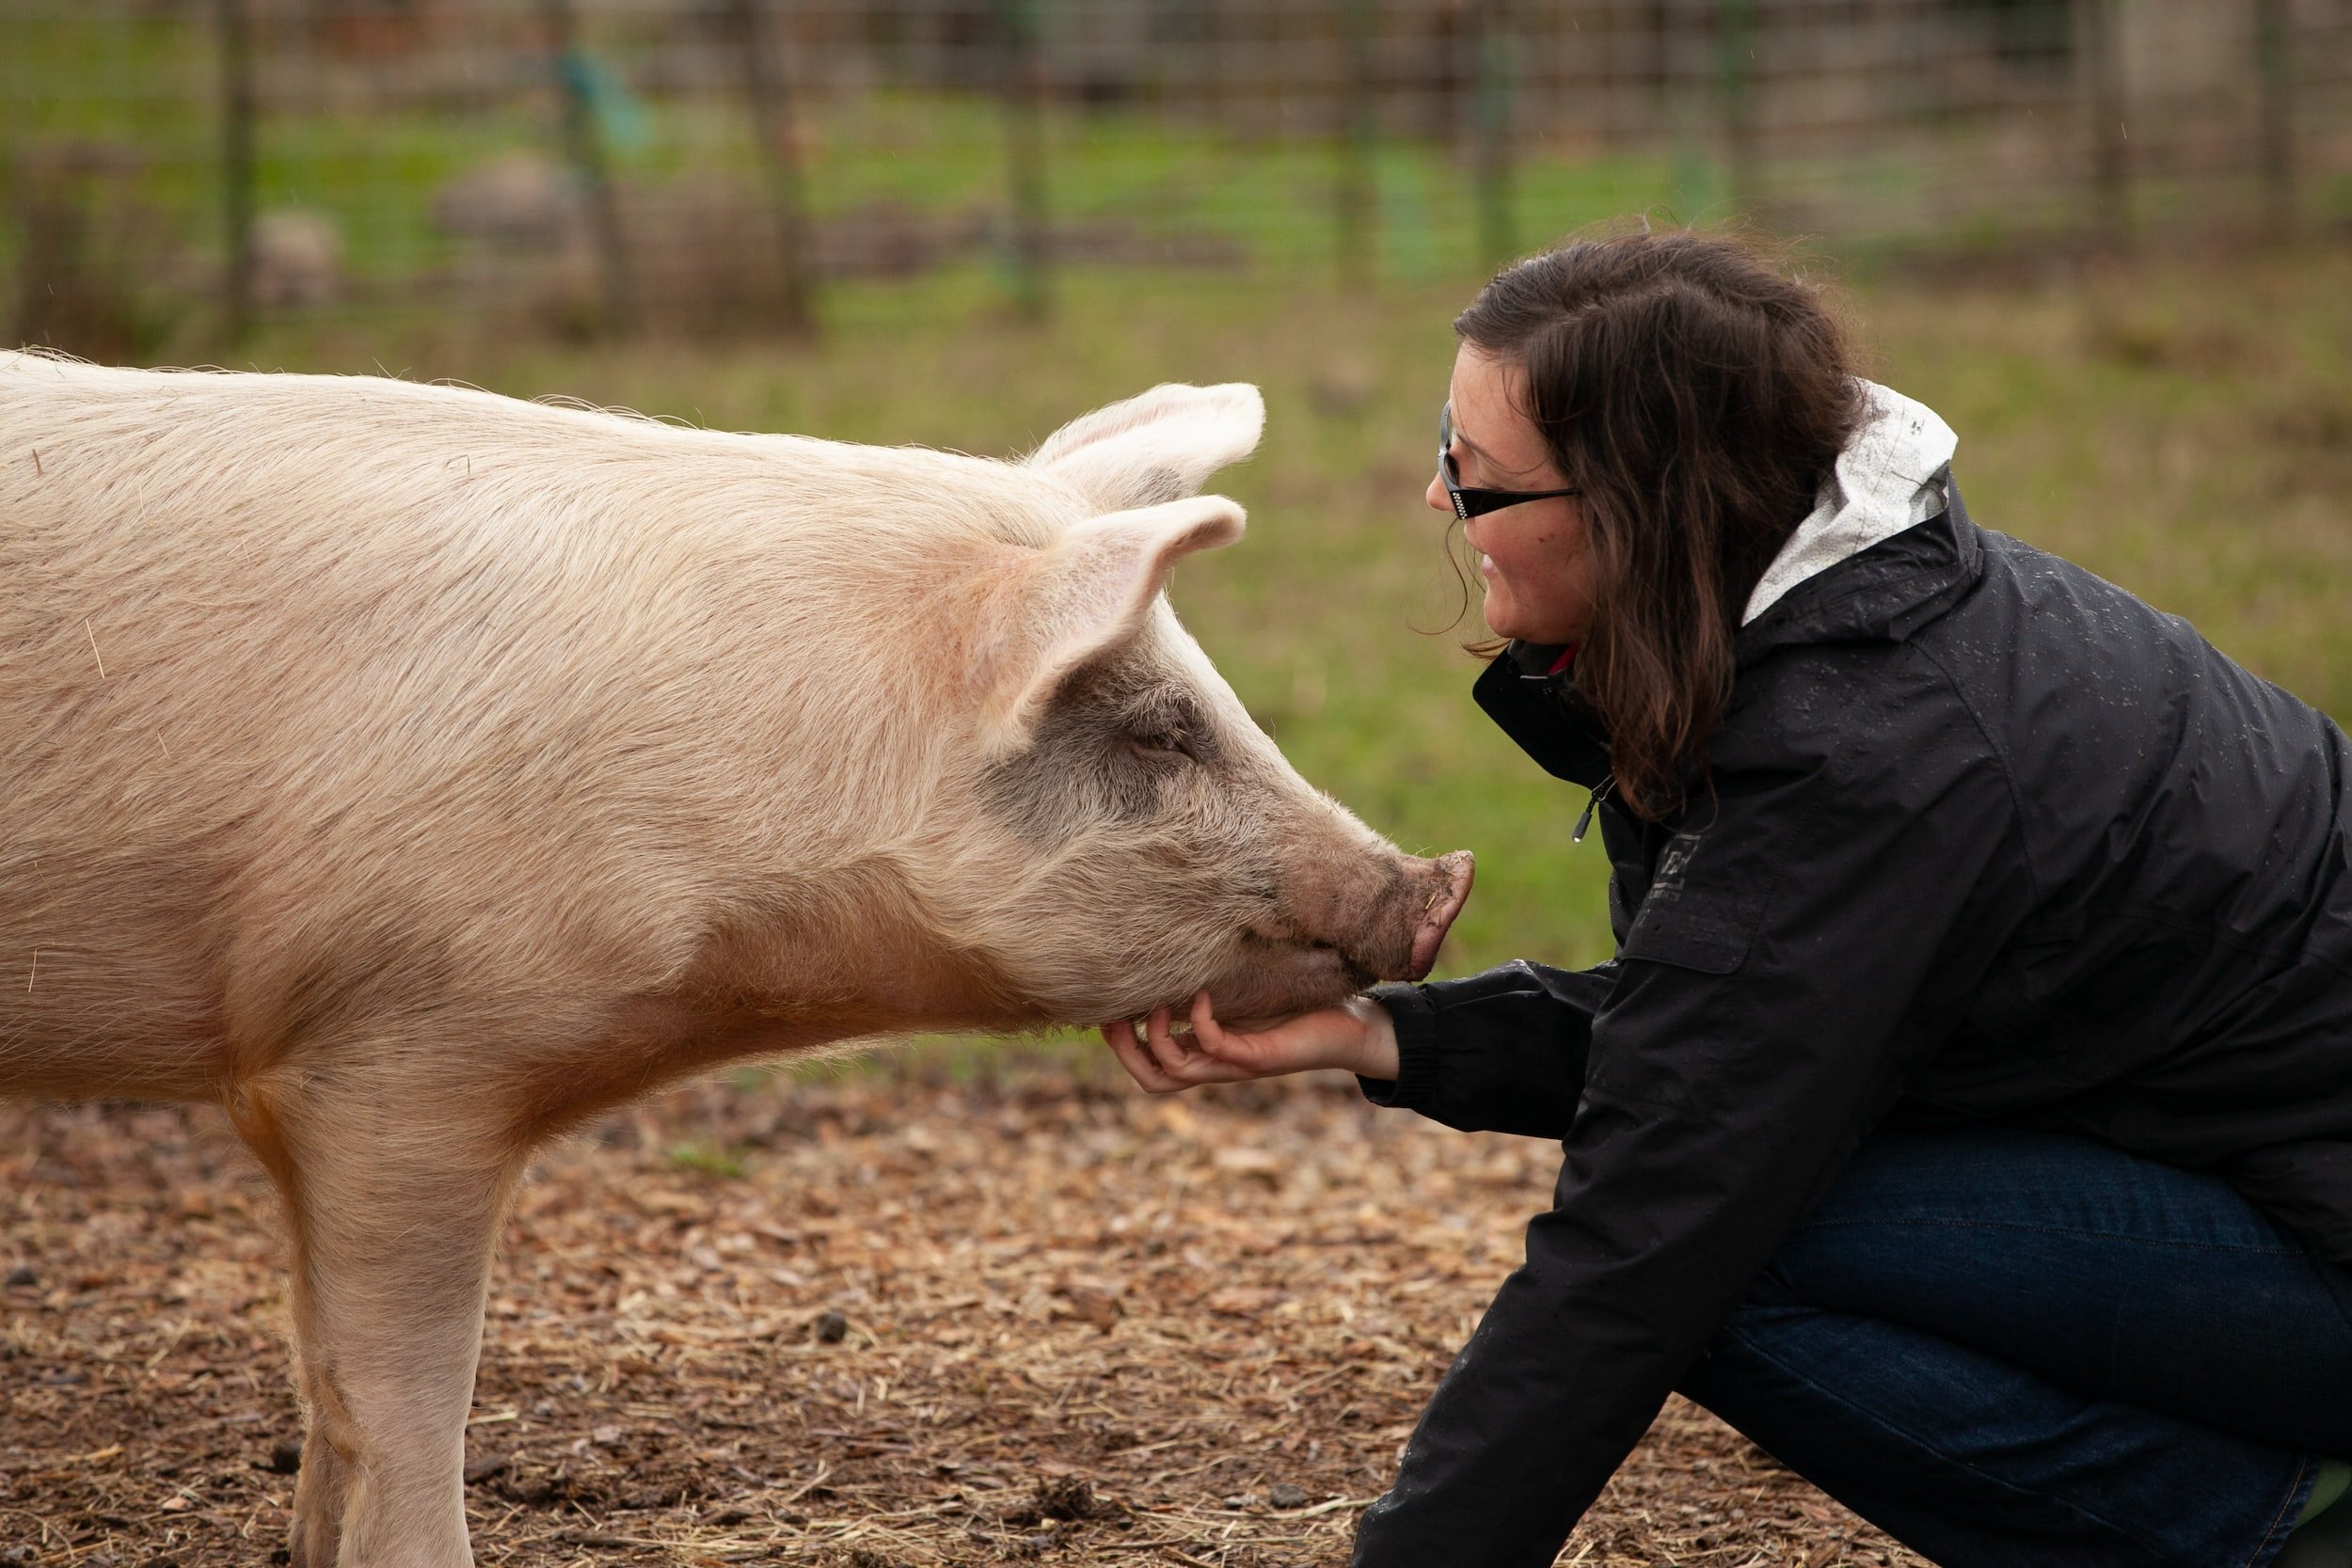 Harmony between humans and animals: Woman shows care for a pig - Dyrenes Alliance highlights the importance of animal rights. Support our mission to promote compassion and justice for farm animals.